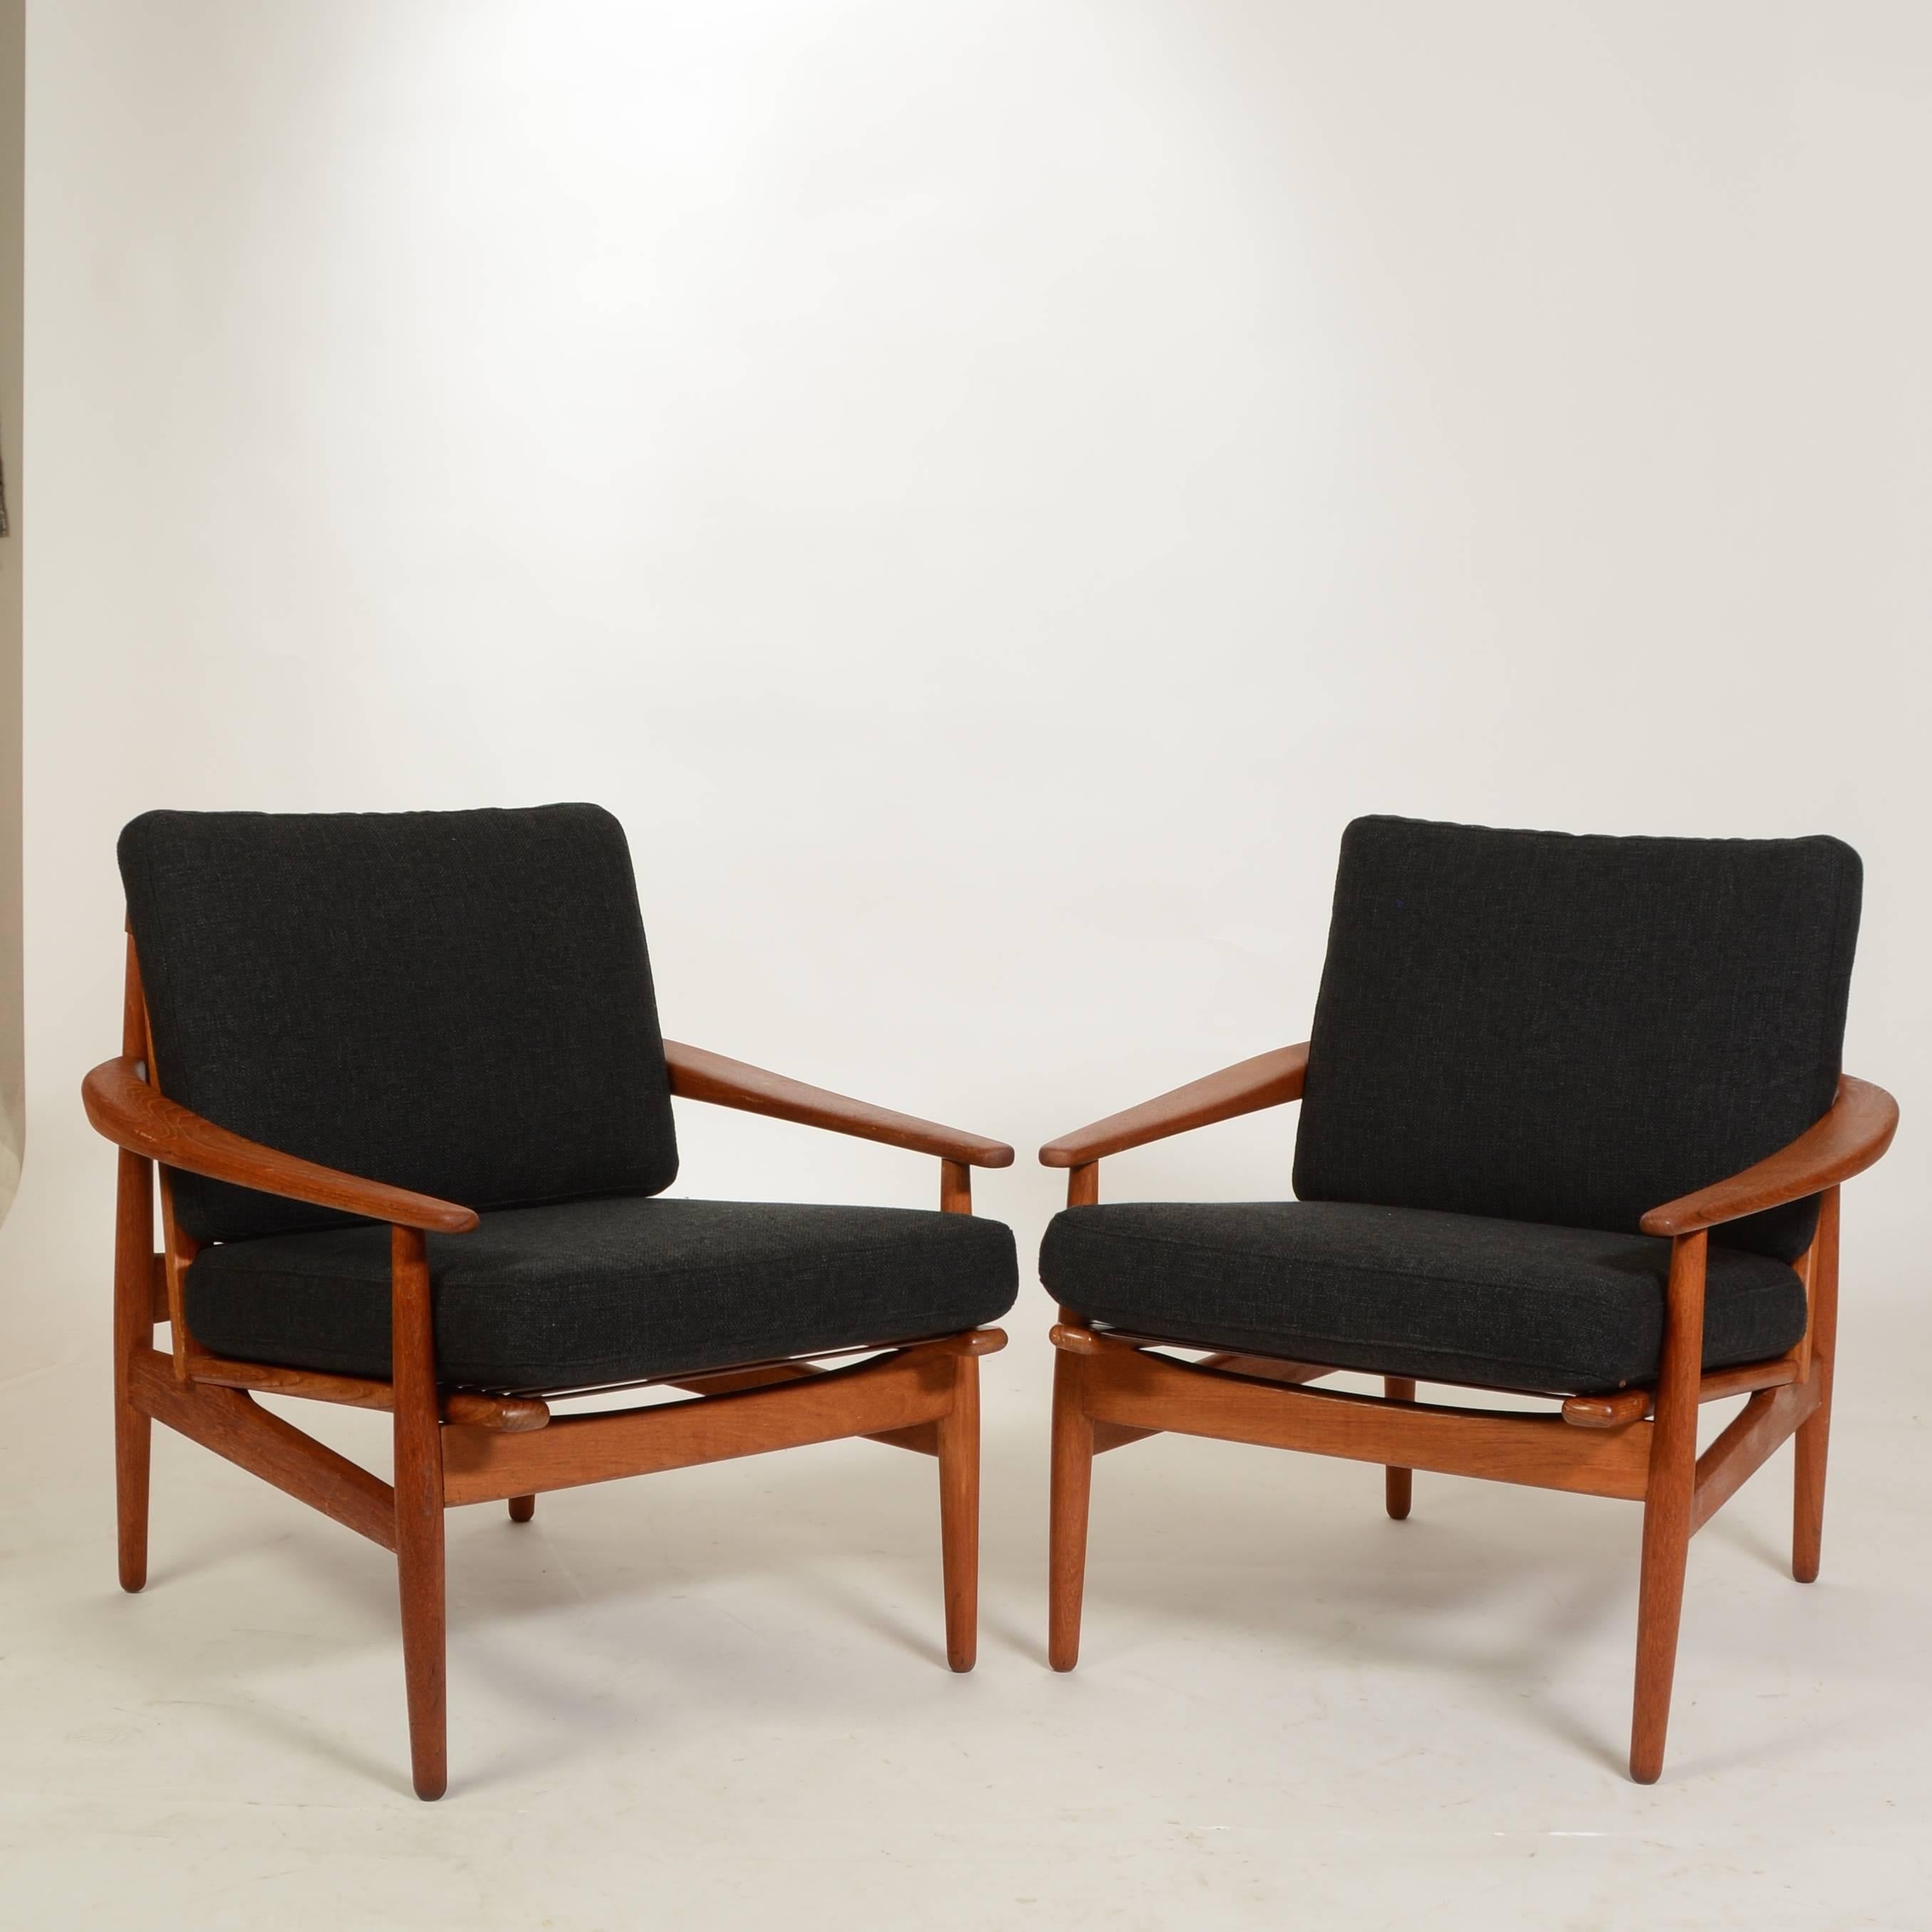 These are amazing Danish modern lounge chairs in the style of Grete Jalk.  The wood is in outstanding condition and the pads and upholstery are brand new.  